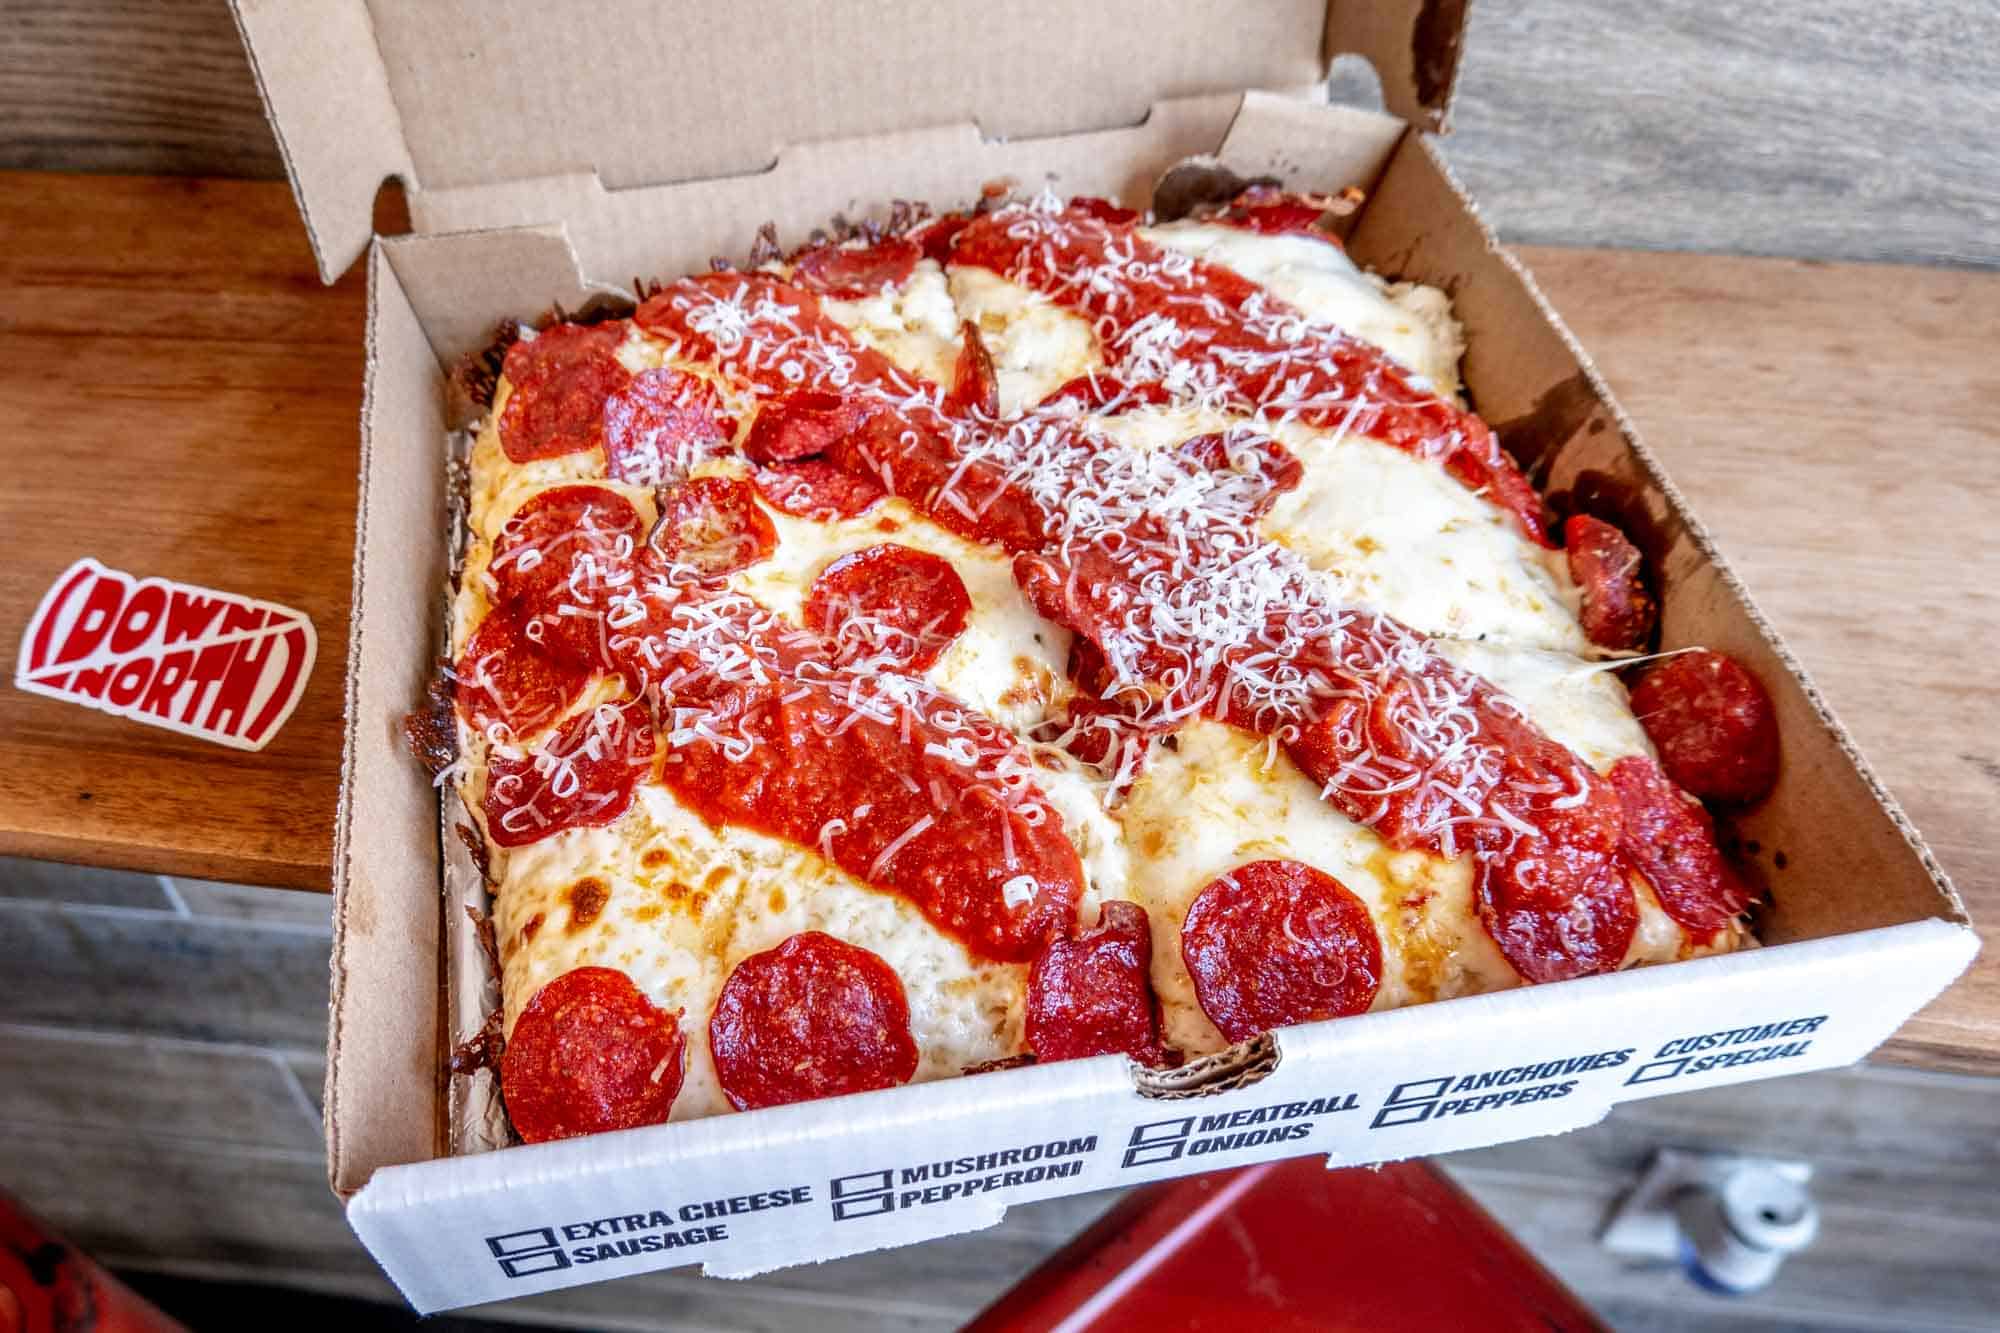 Square-style pizza from Down North in cardboard box